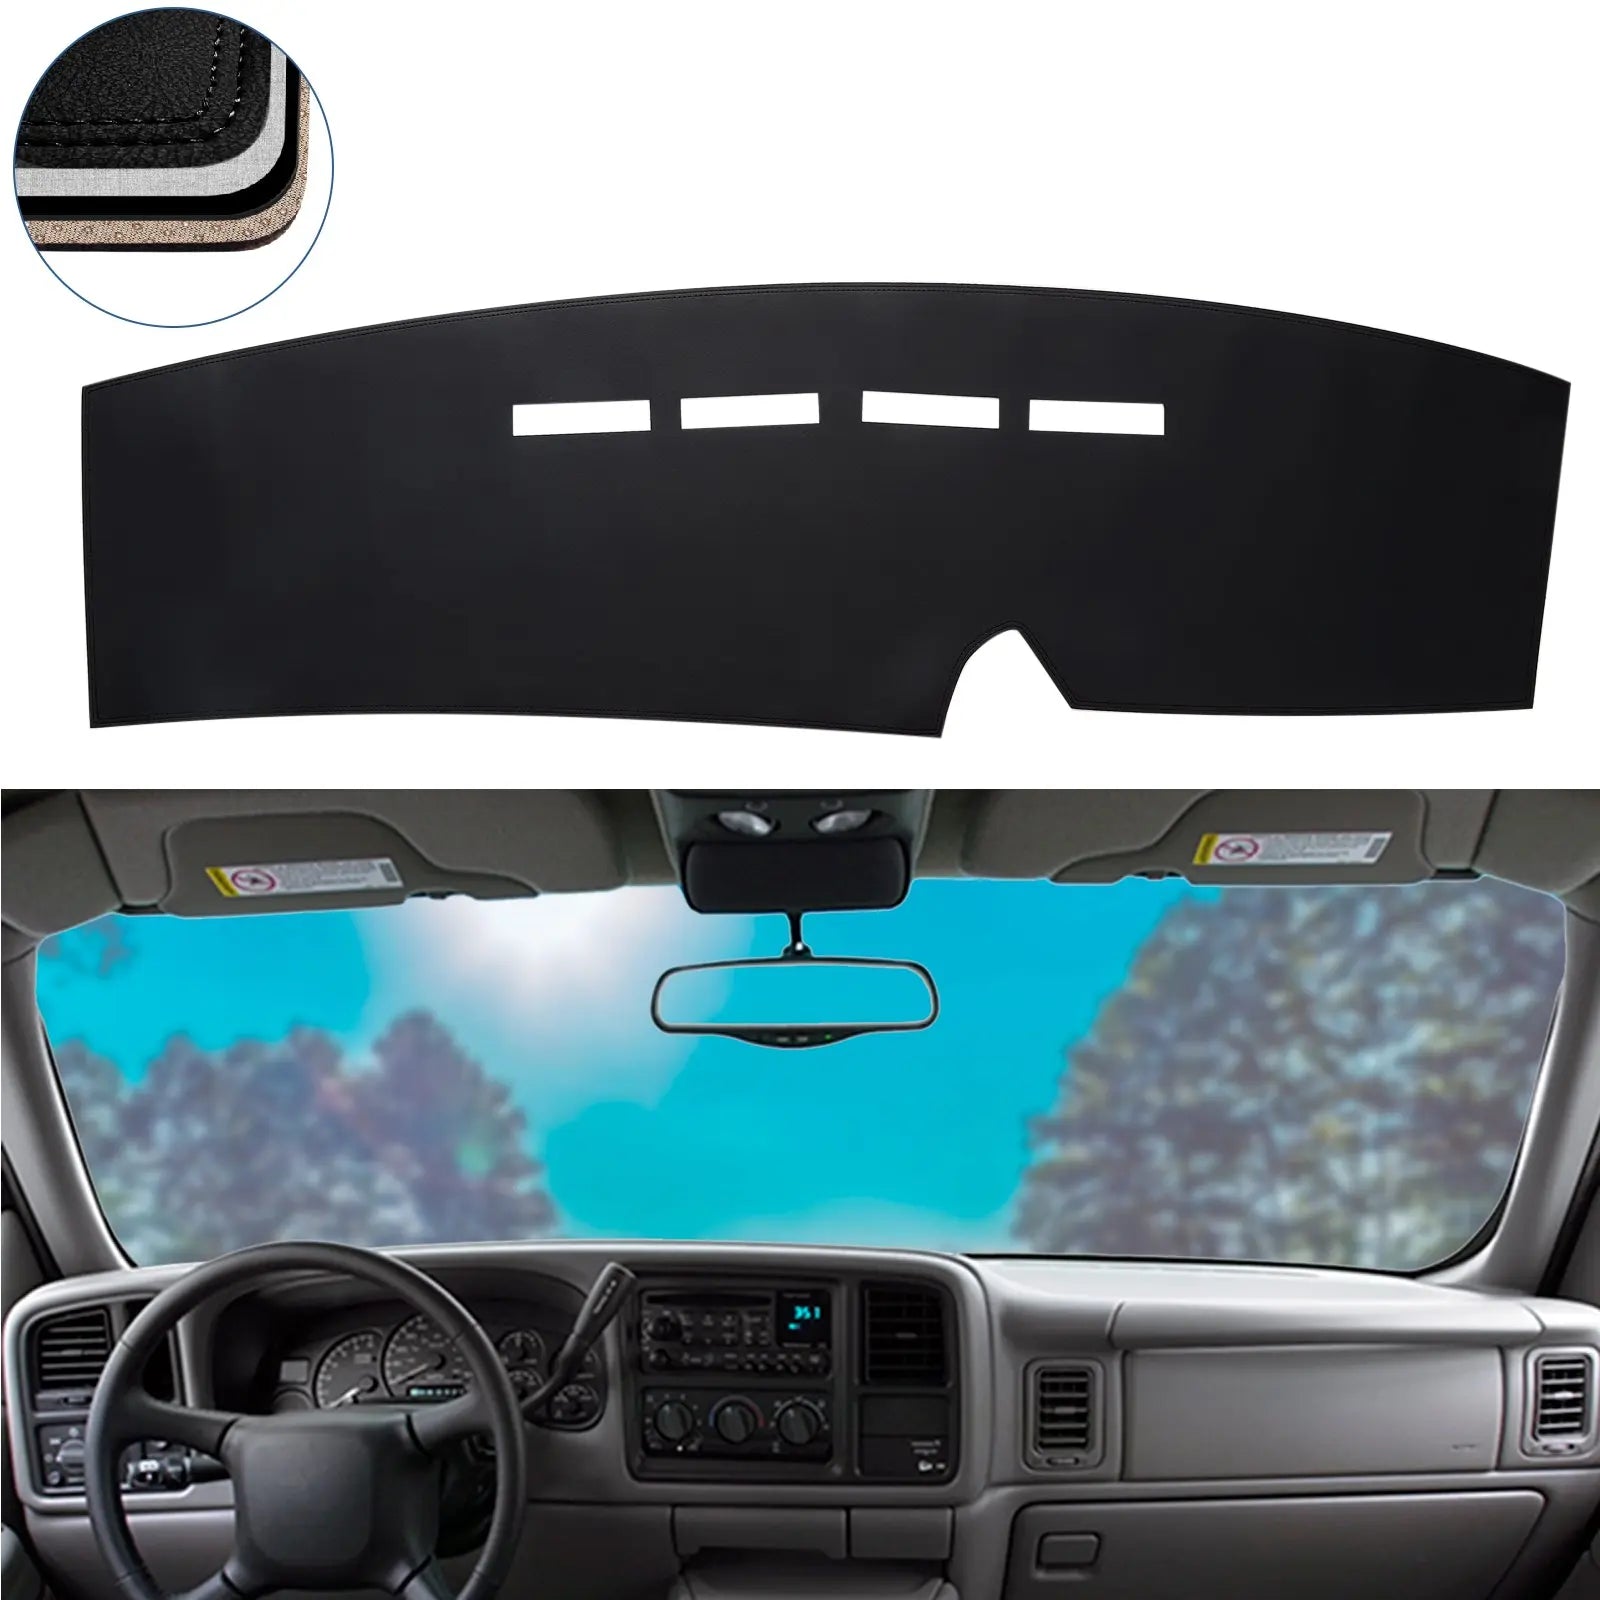 HanLanKa Dashboard Cover for GMC Sierra and Chevrolet Silverado- Fits  2007-2013 Models with Two Glove Boxes. Custom Fit Dash Mat, Won't Break  Dash